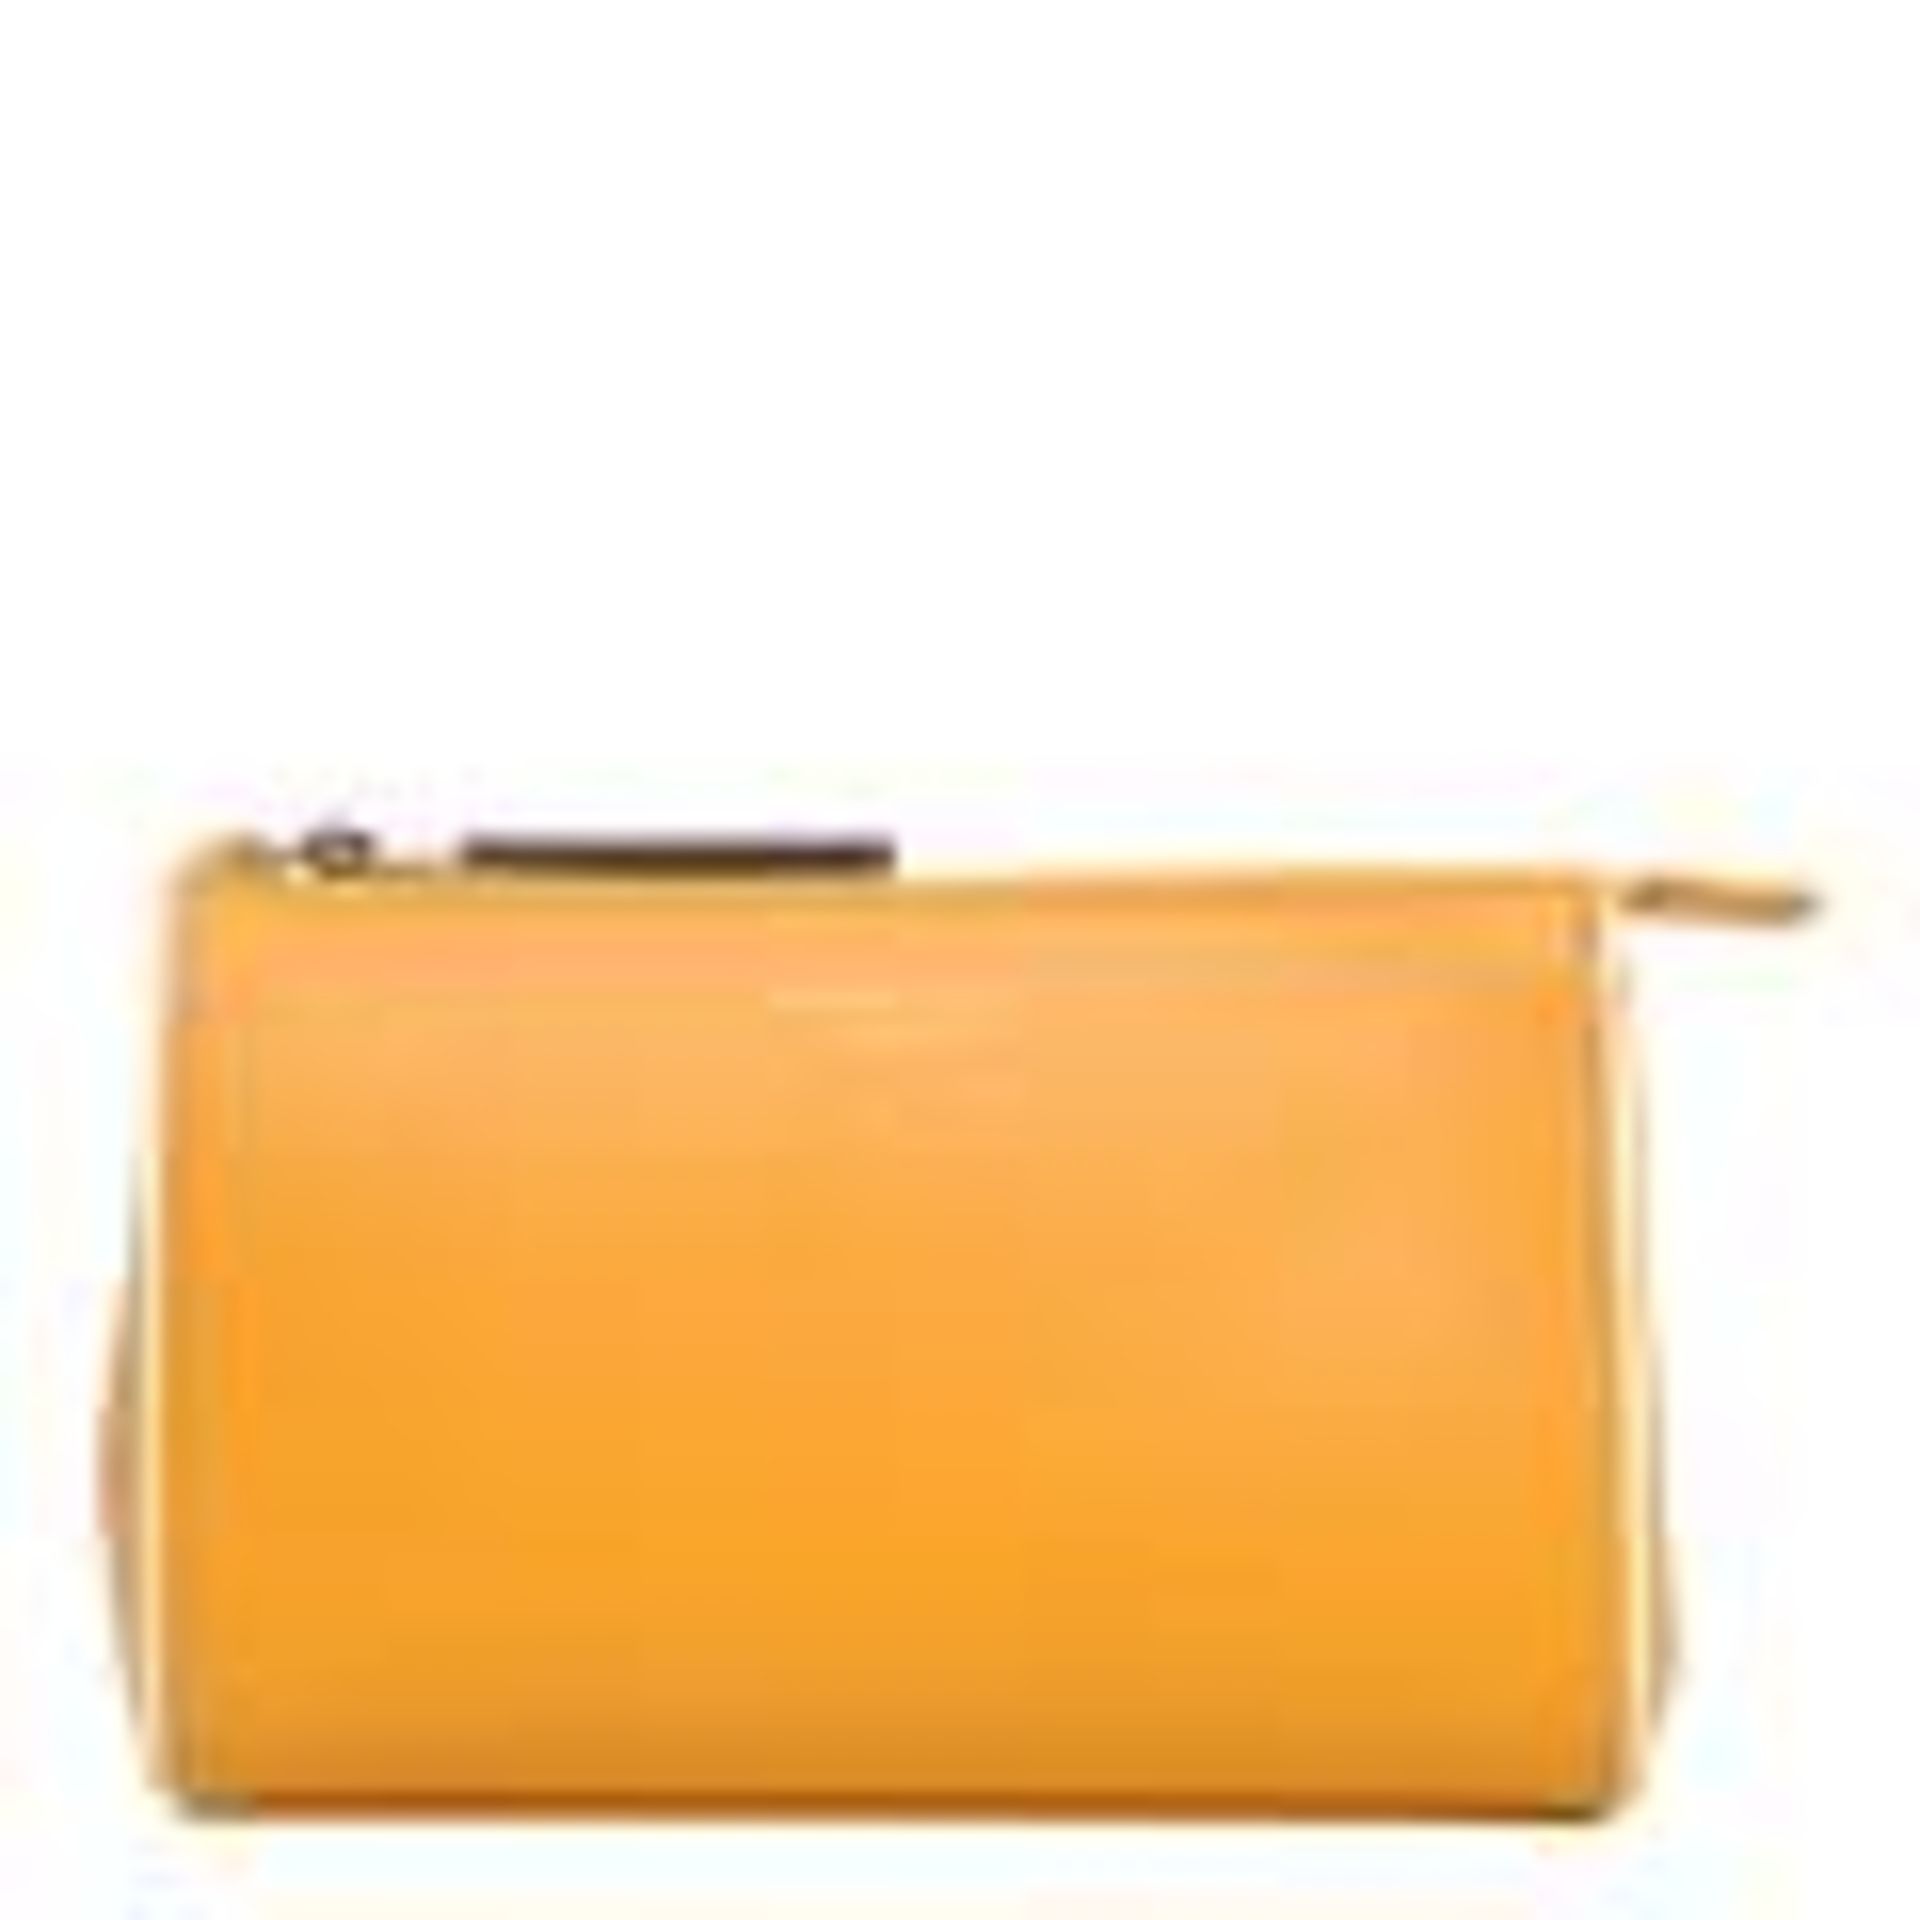 BRAND NEW RADLEY SELBY STREET YELLOW COSMETIC POUCH BUTTERCUP (5641) RRP £55 P5